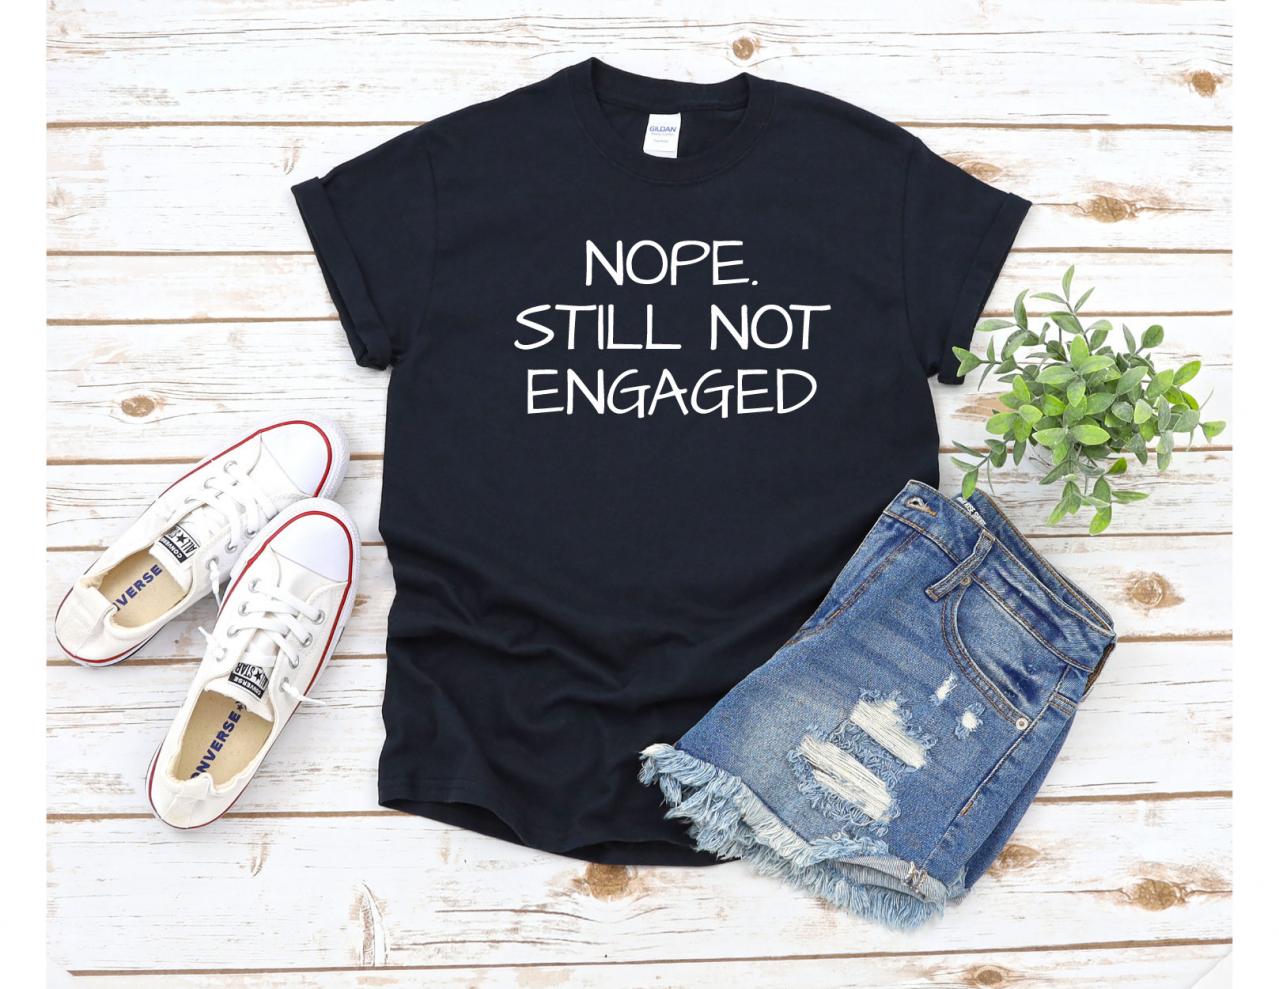 Nope Still Not Engaged Shirt, Funny Christmas Shirt, Funny Shirt, Funny Thanksgiving Shirt, Still Single, Not Married T Shirt, Holiday Shirt